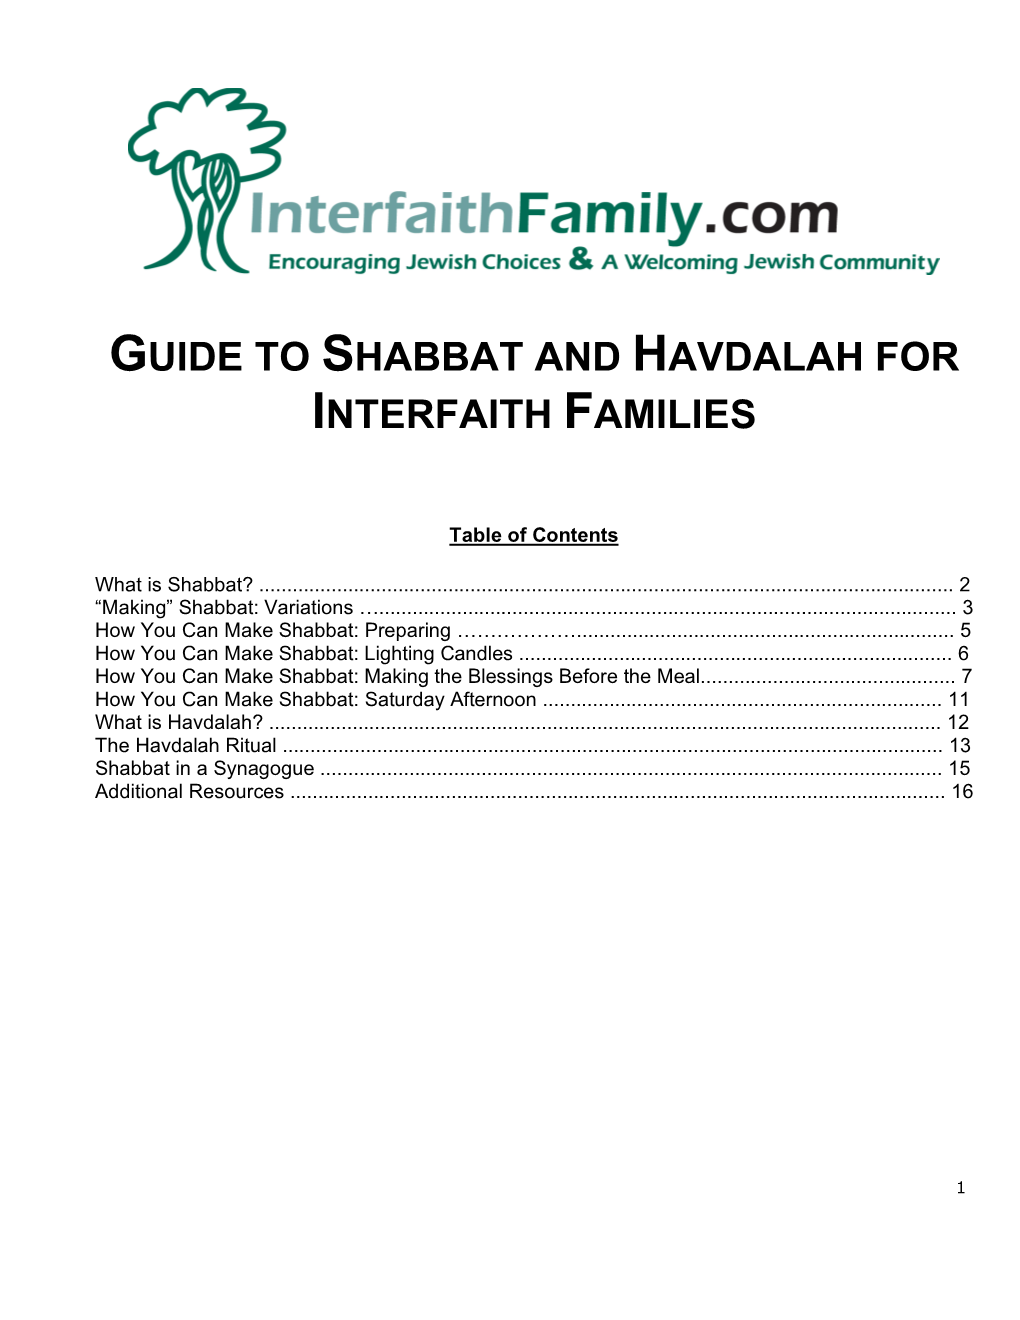 Guide to Shabbat and Havdalah for Interfaith Families